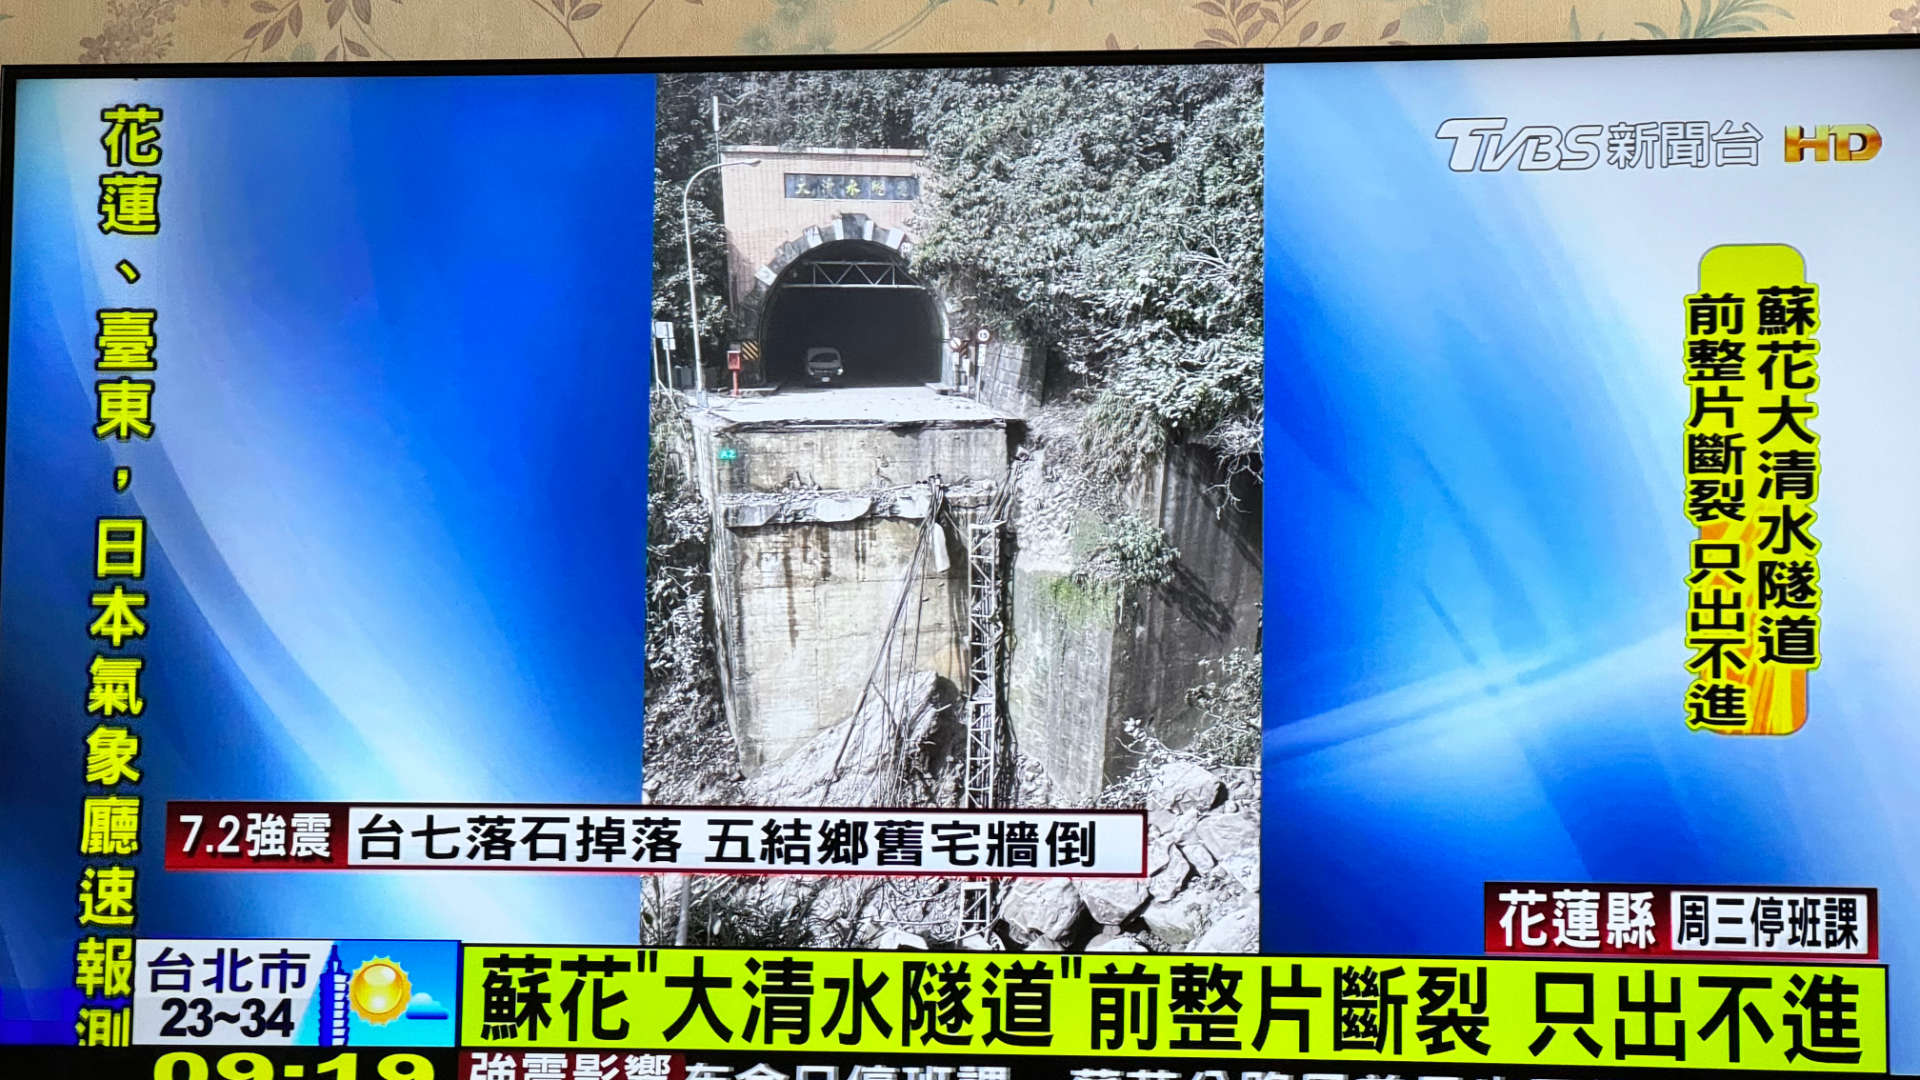 TVBS news footage of a collapsed bridge at the entrance to a road tunnel near Hualien, Taiwan.